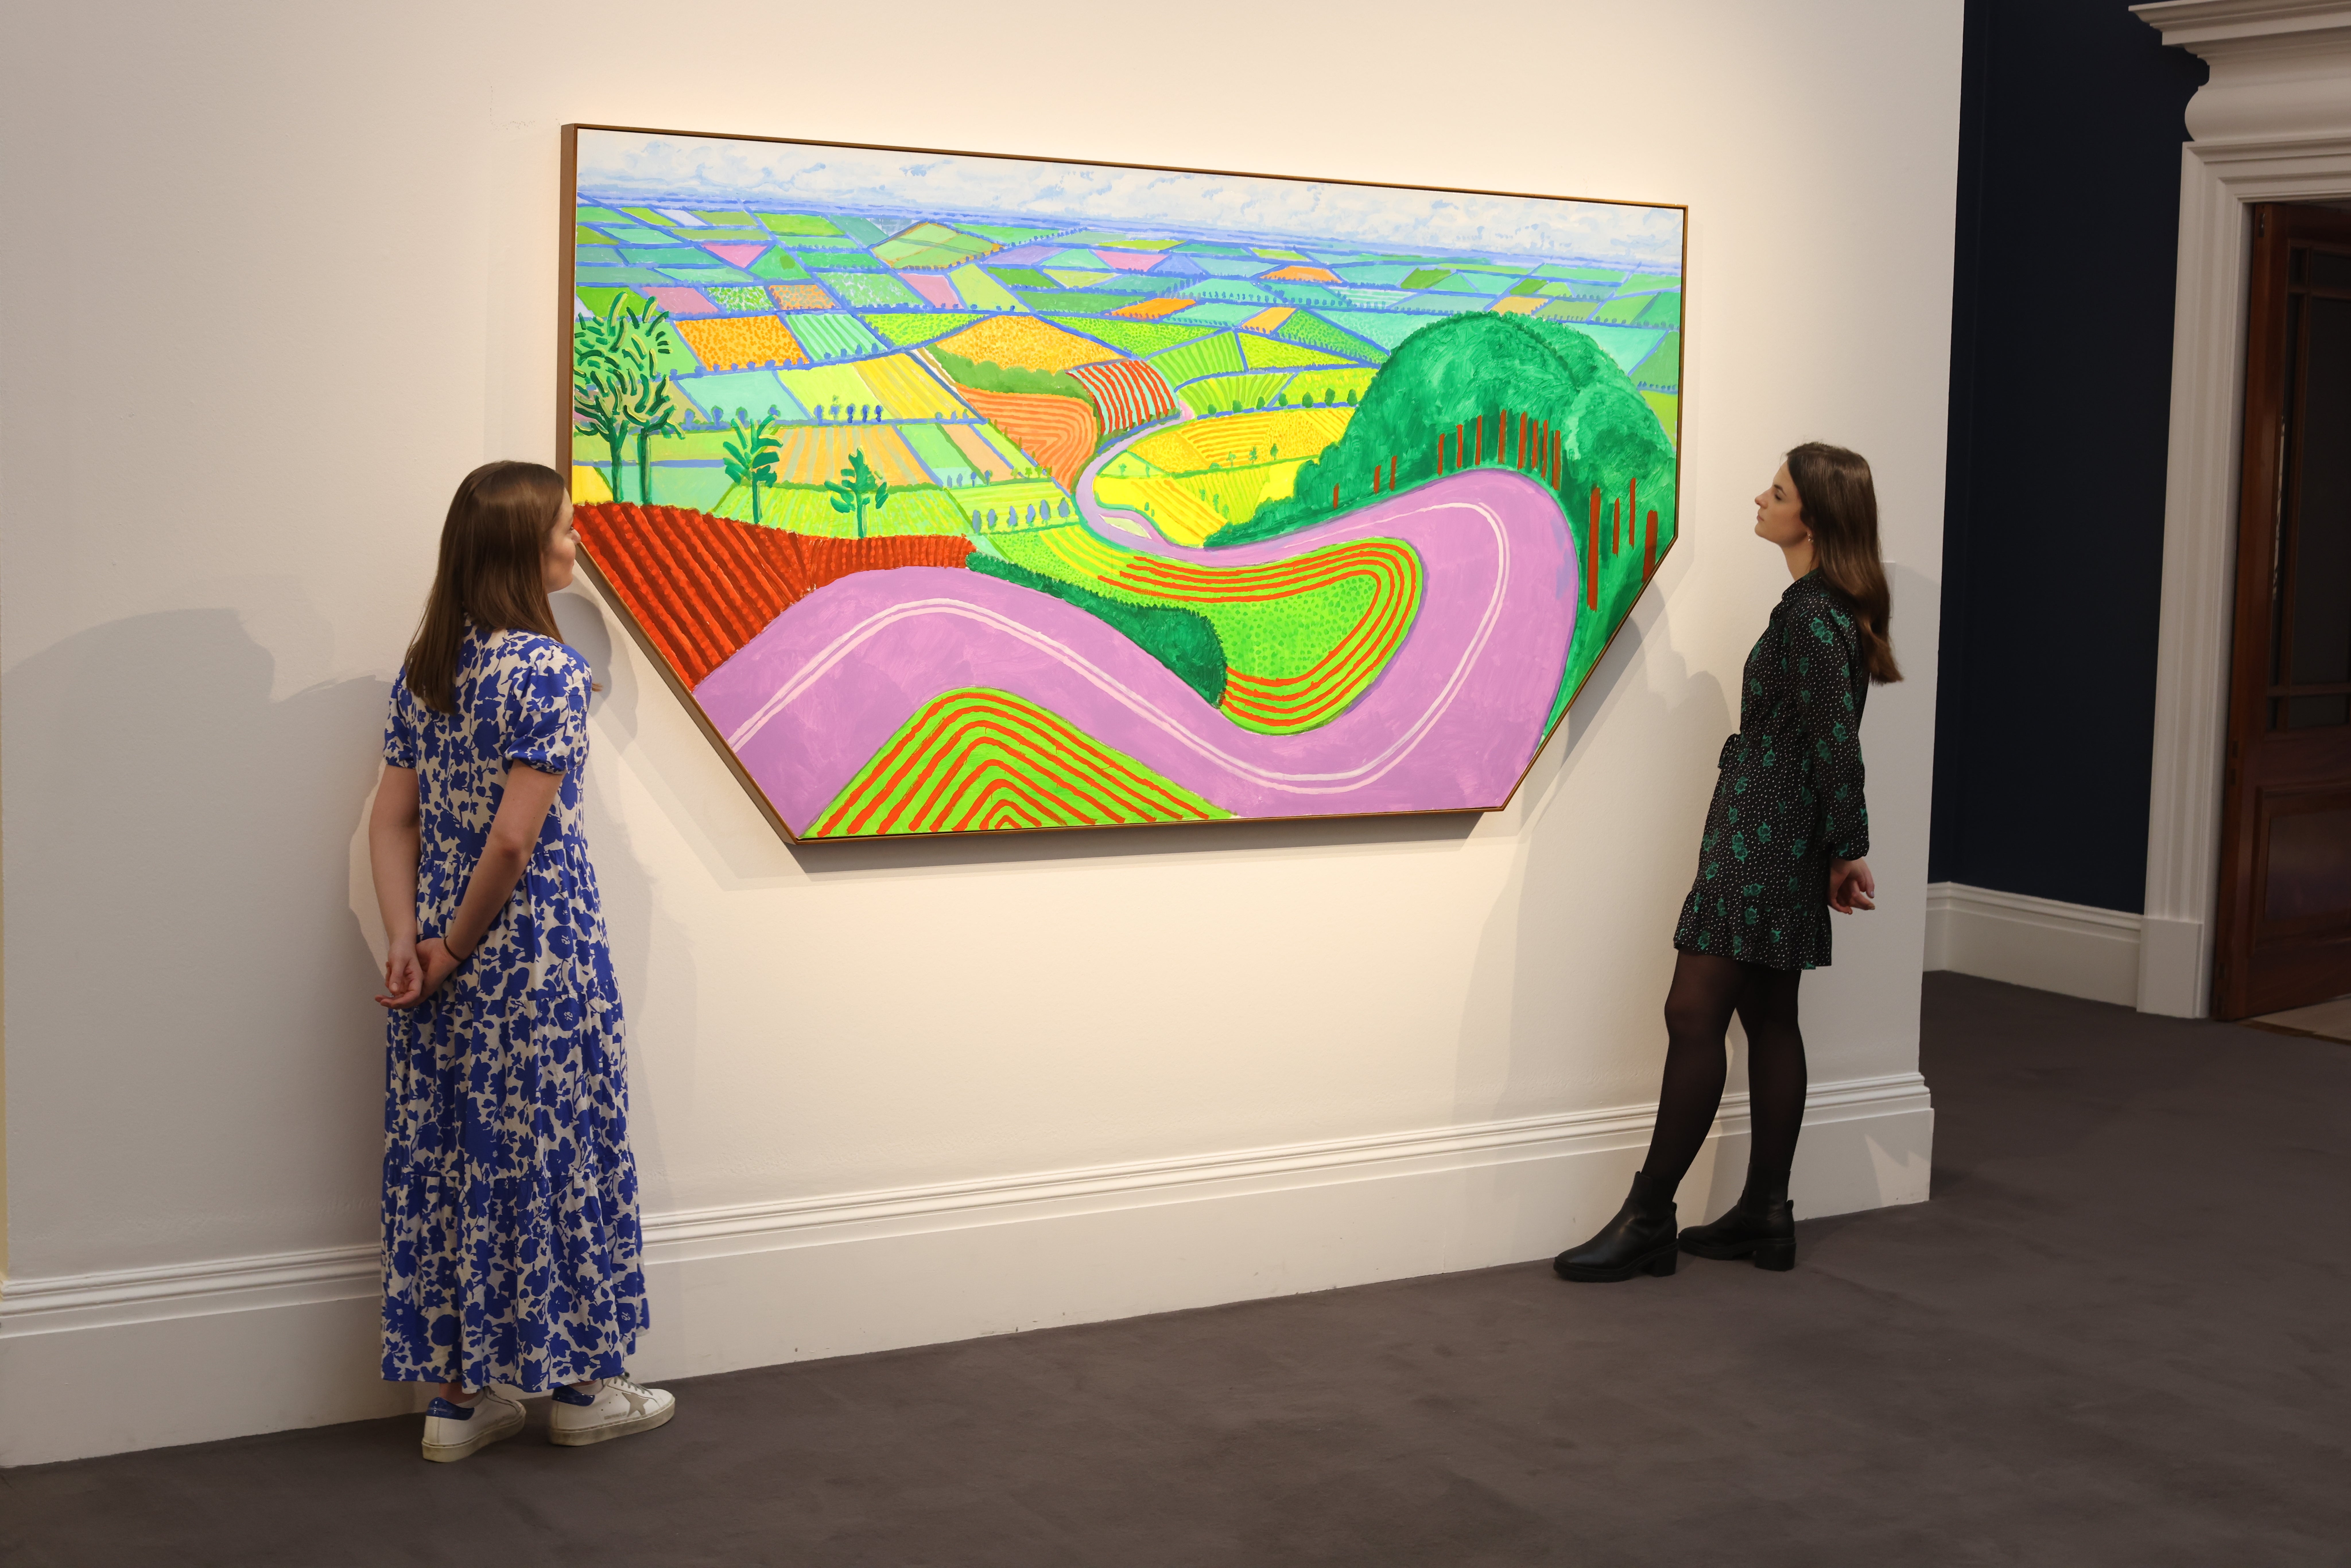 David Hockney’s Garrowby Hill is among the works up for auction next month (James Manning/PA)